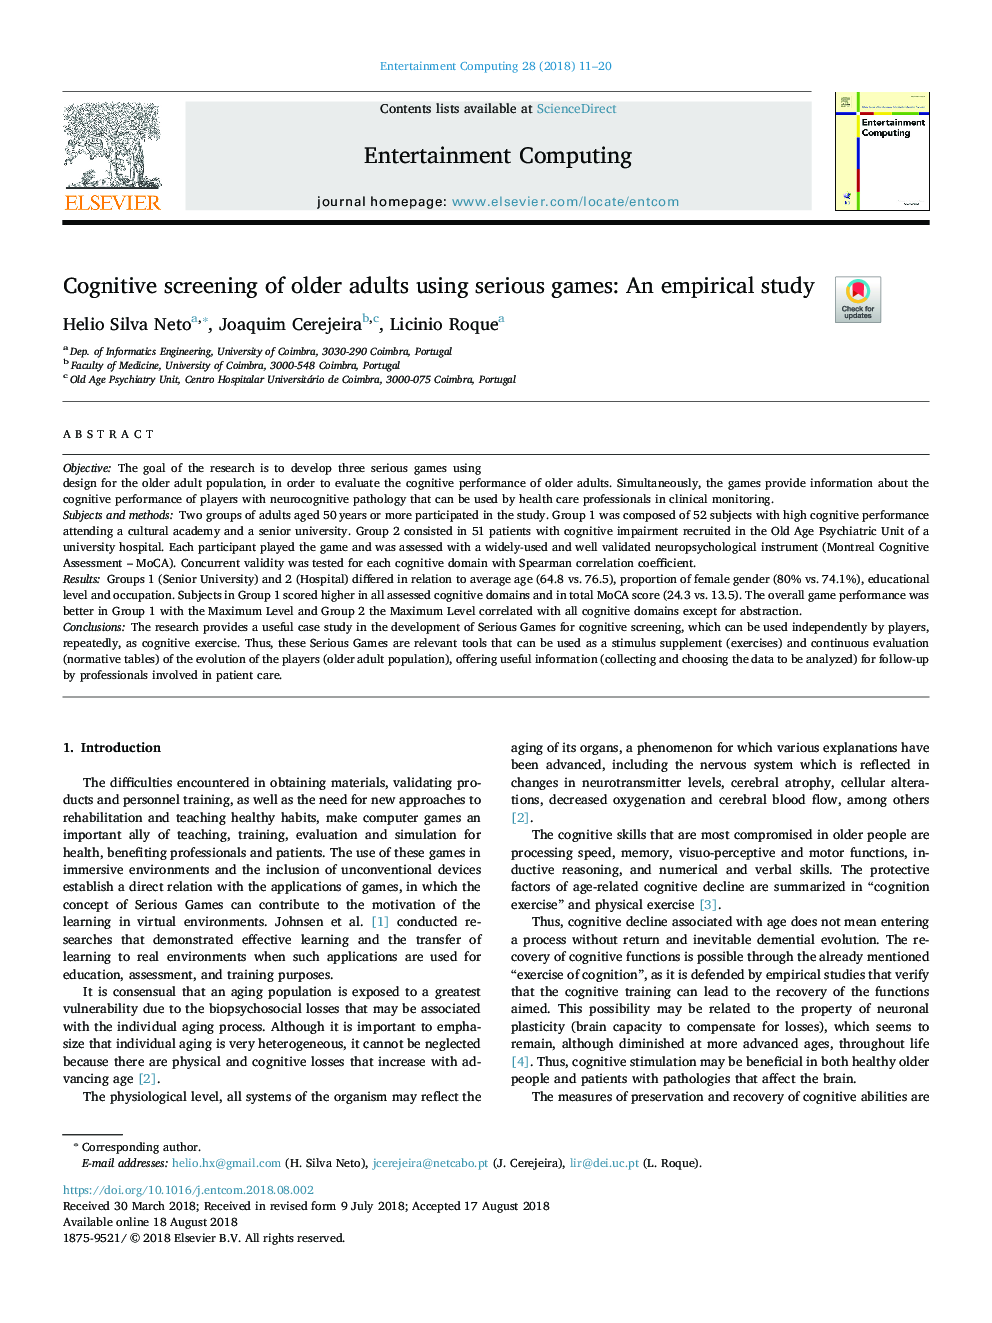 Cognitive screening of older adults using serious games: An empirical study